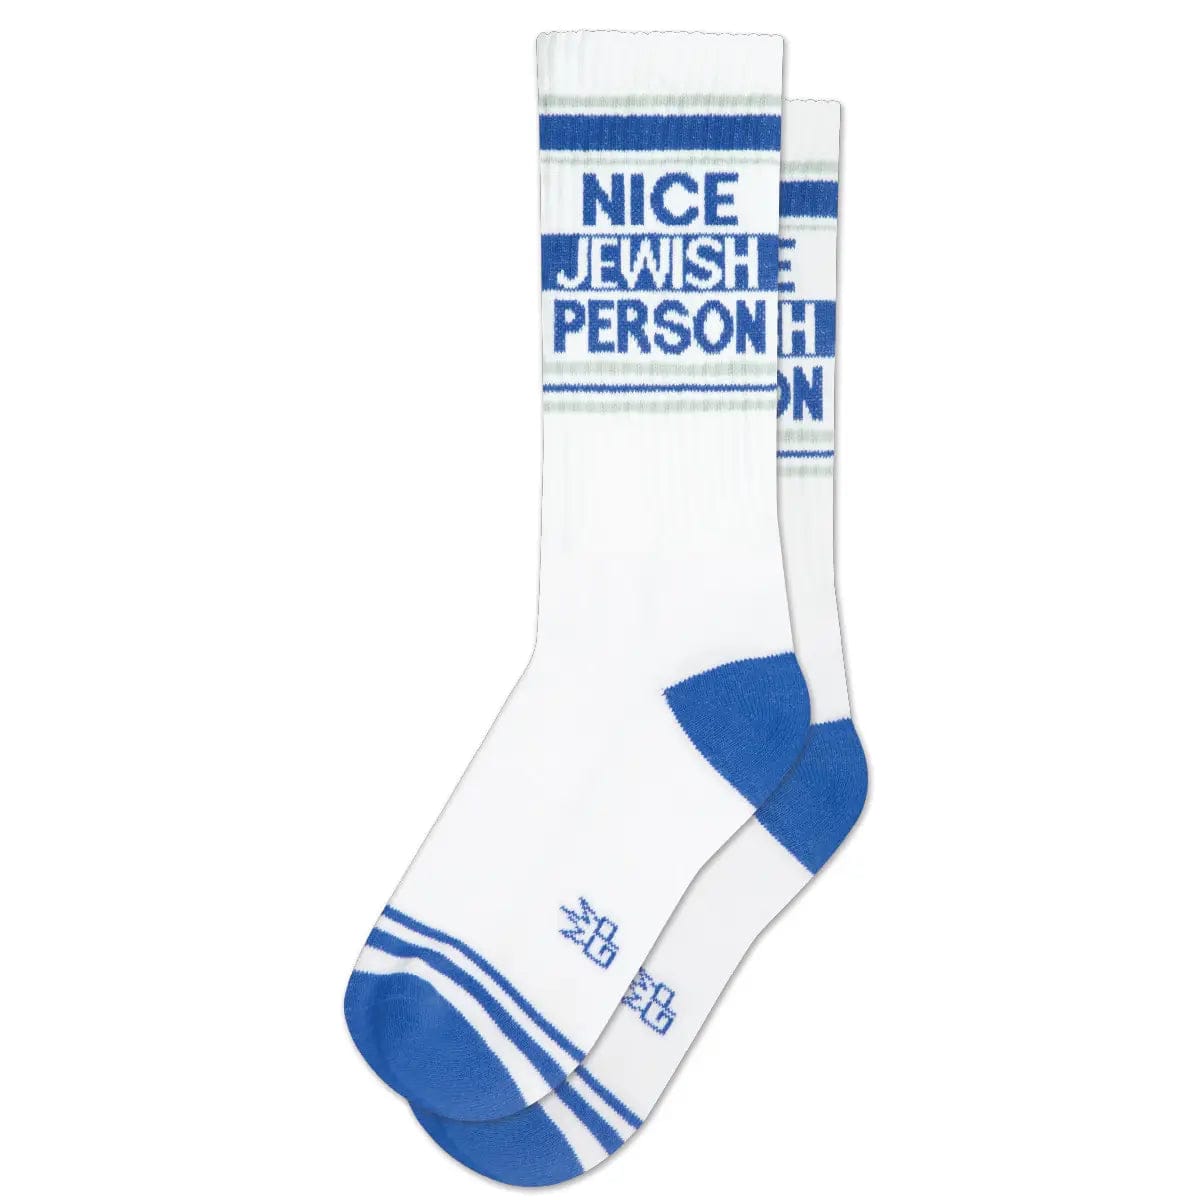 Gumball Poodle Socks Blue / One Size Nice Jewish Person Gym Socks